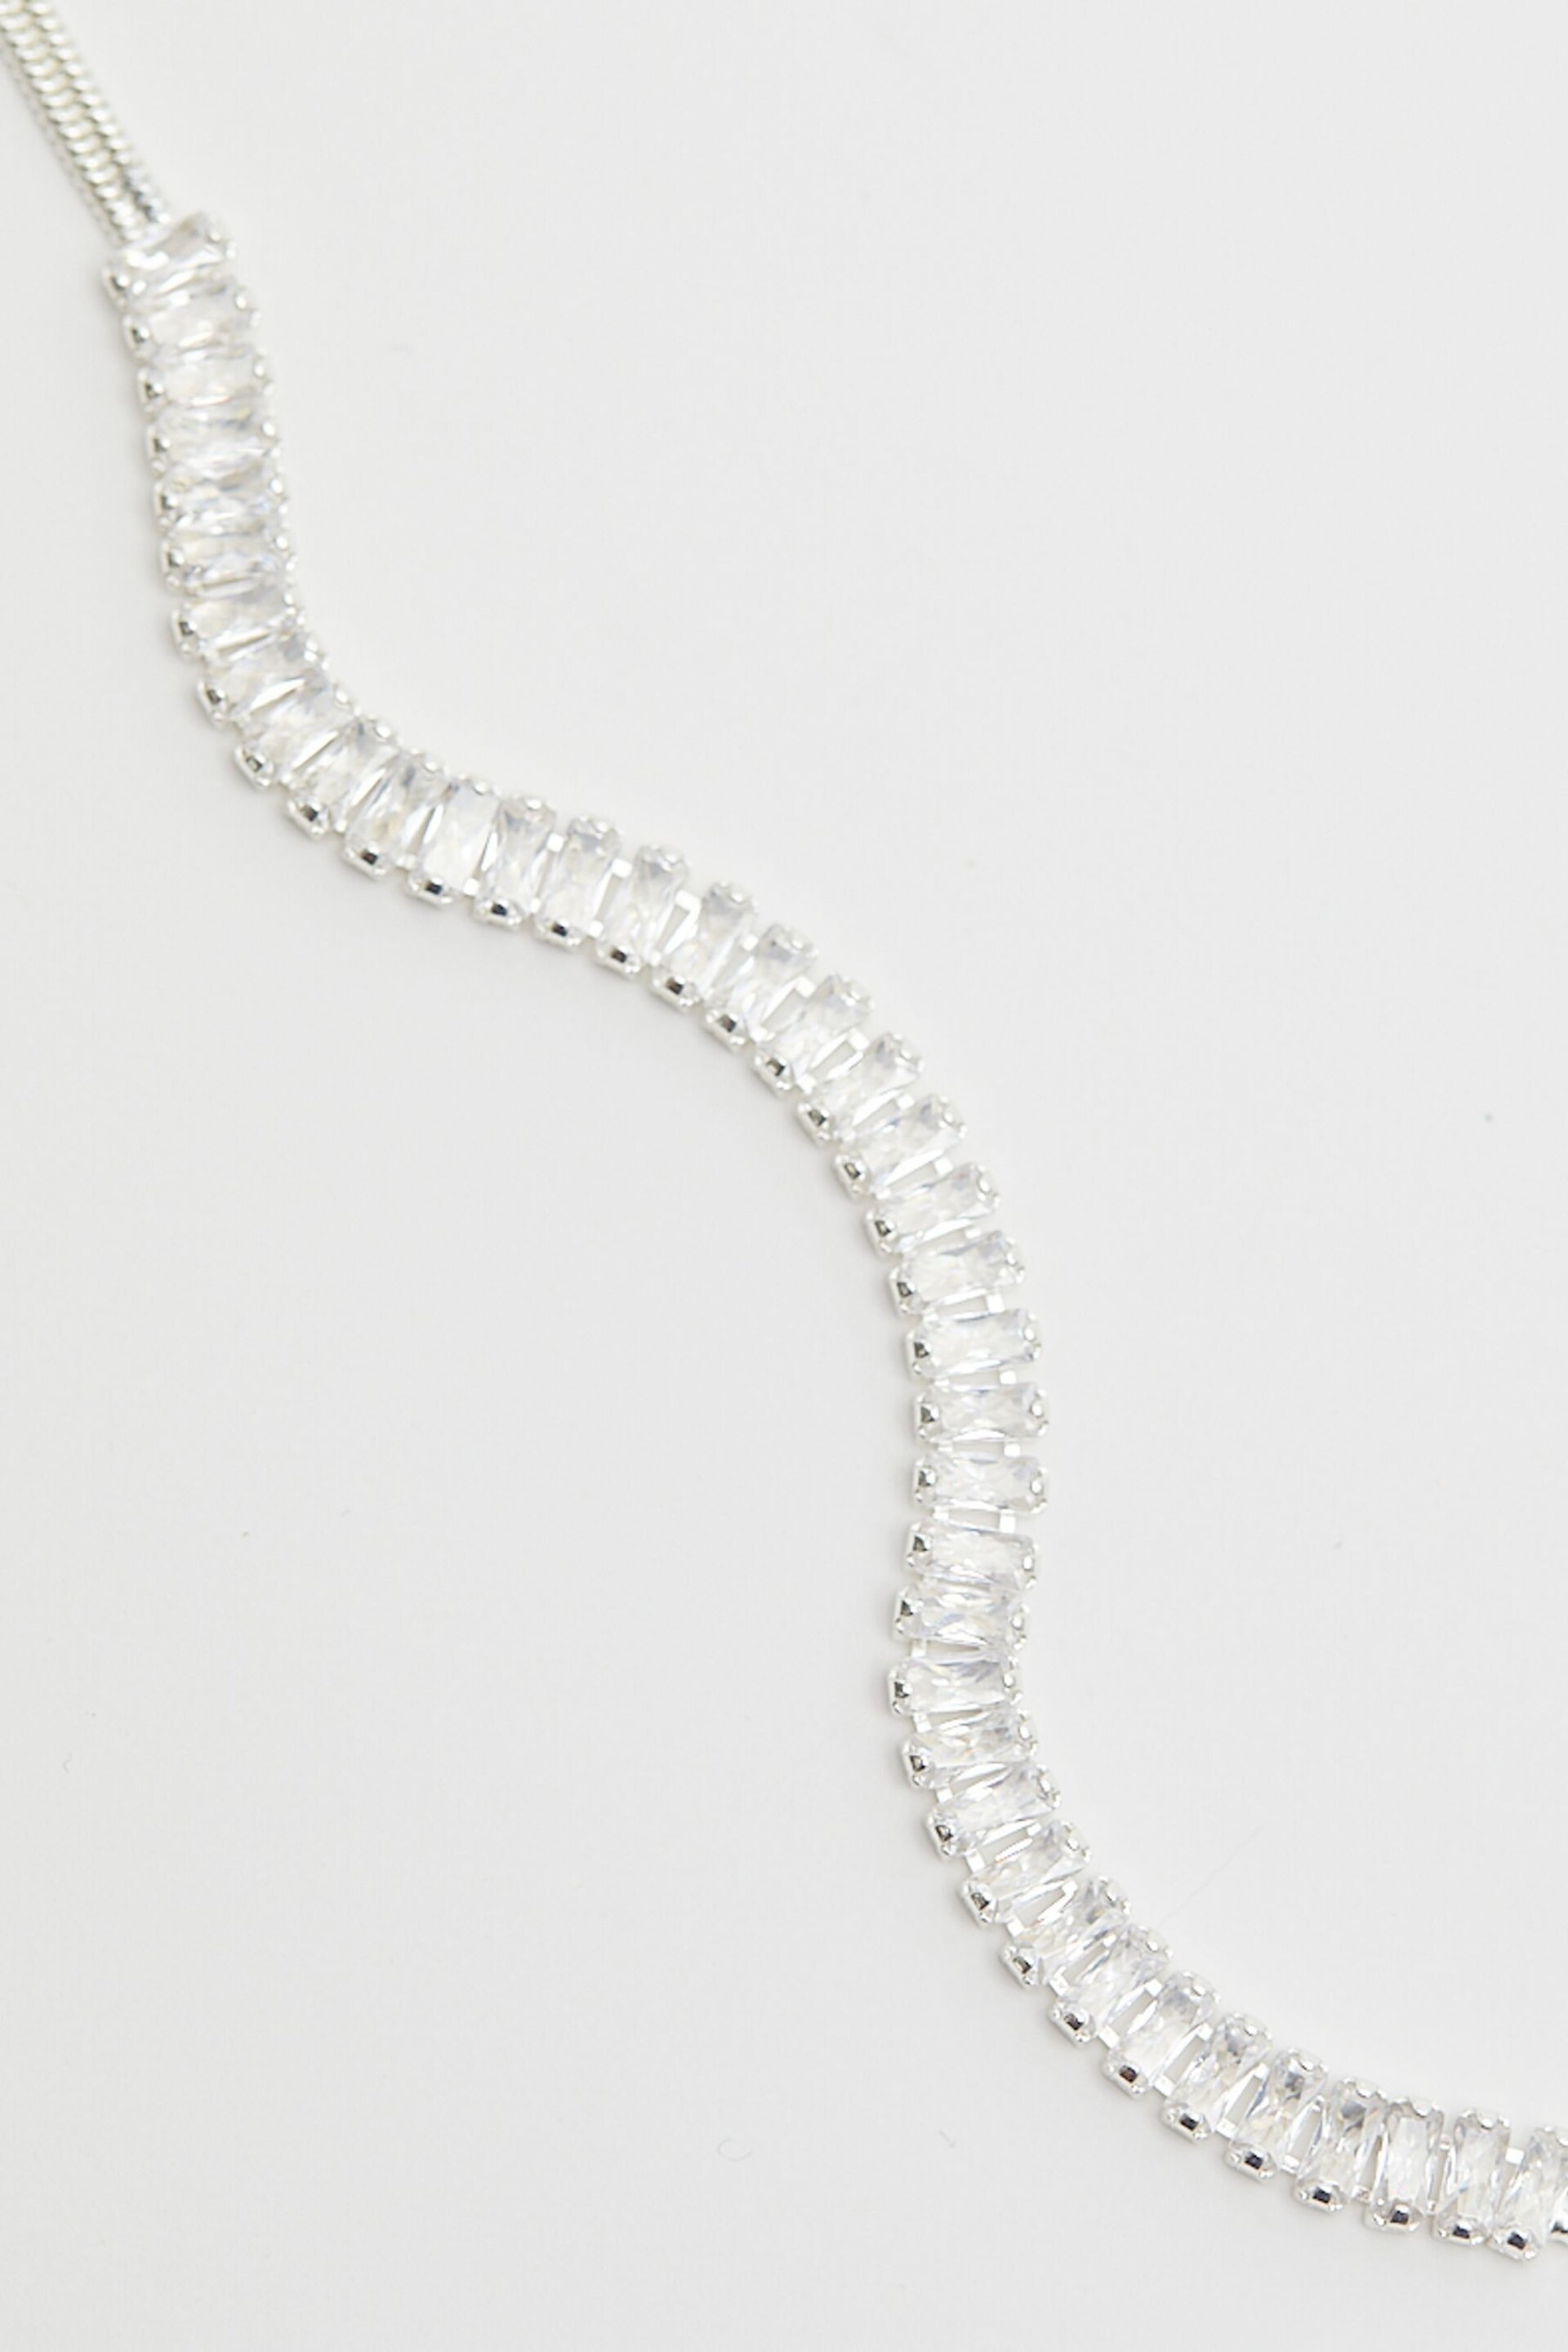 Mood Silver Tone Crystal Baguette Choker Necklace - Image 2 of 4